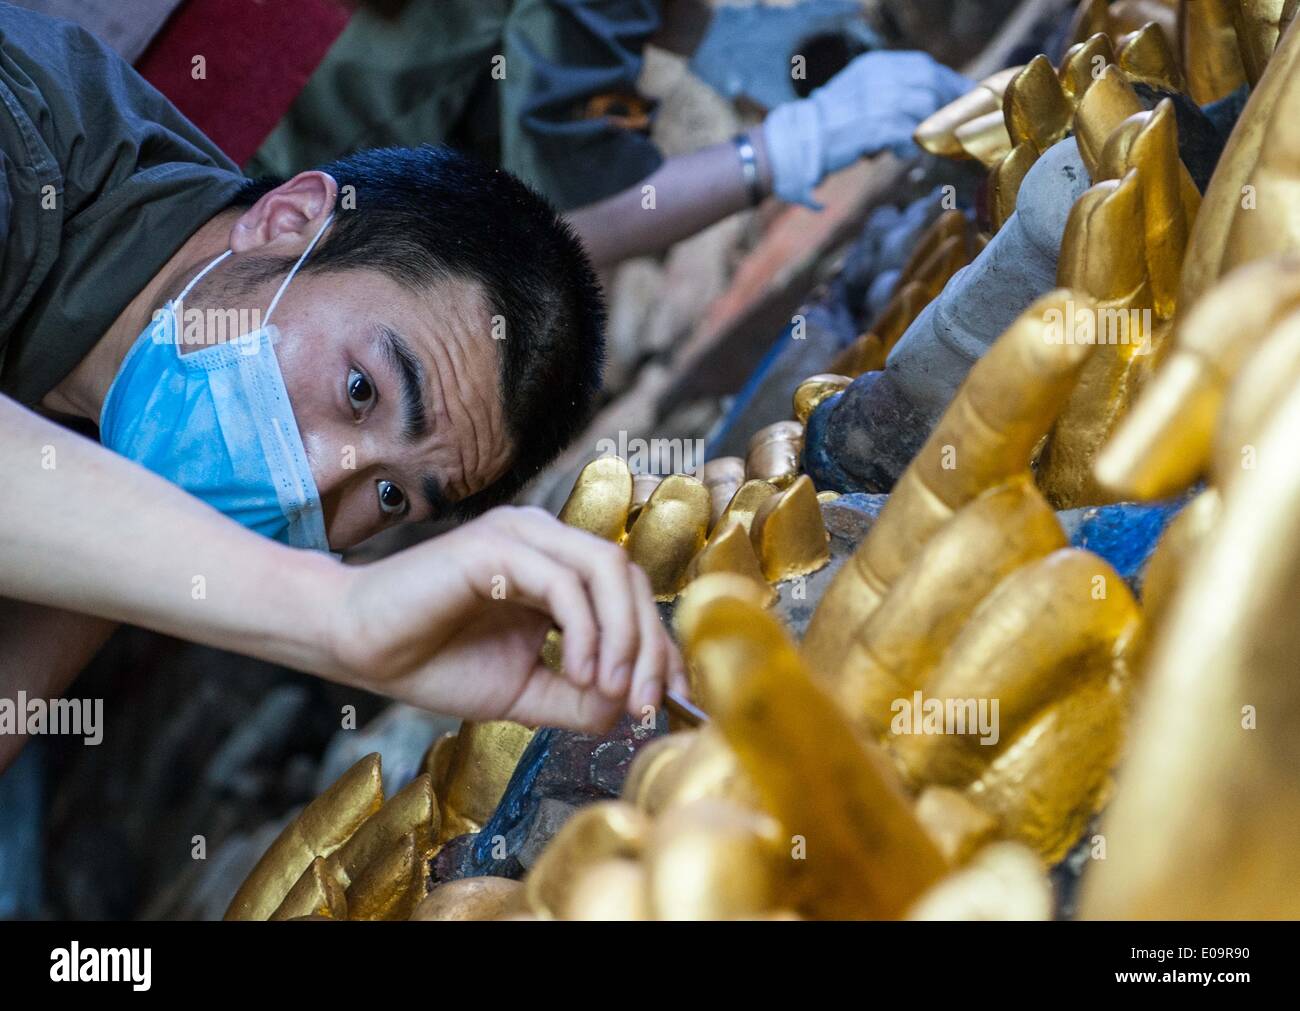 (140507) -- CHONGQING, May 7, 2014 (Xinhua) -- A staff member works during a restoration for a sculpture of Qianshou Guanyin (bodhisattva with a thousand hands) on Mount Baoding in Dazu District in the municipality of Chongqing, southwest China, May 7, 2014. The sculpture, carved in the cave with 7.7 meters high and 12.5 meters wide, could date back to Southern Song Dynasty (1127 to 1279). Over the centuries, the sculpture's color has faded, parts of the gold foil covering have peeled off, and cracks have appeared. And thus, a restoration project for the Buddhist statue has been launched since Stock Photo